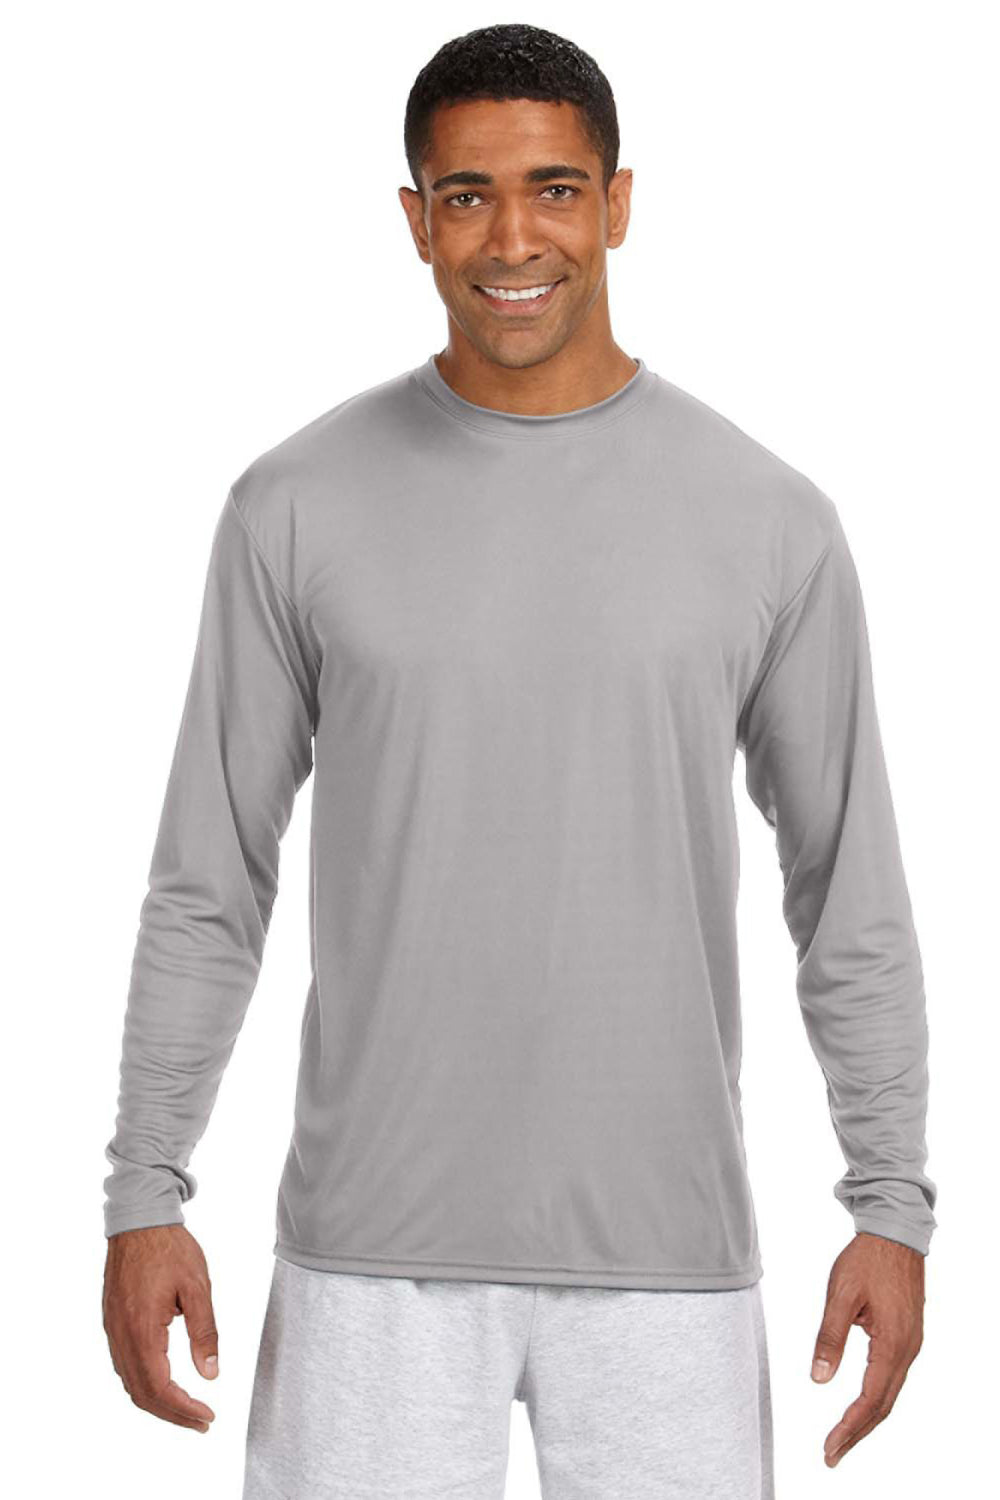 A4 N3165 Mens Performance Moisture Wicking Long Sleeve Crewneck T-Shirt Silver Grey Model Front